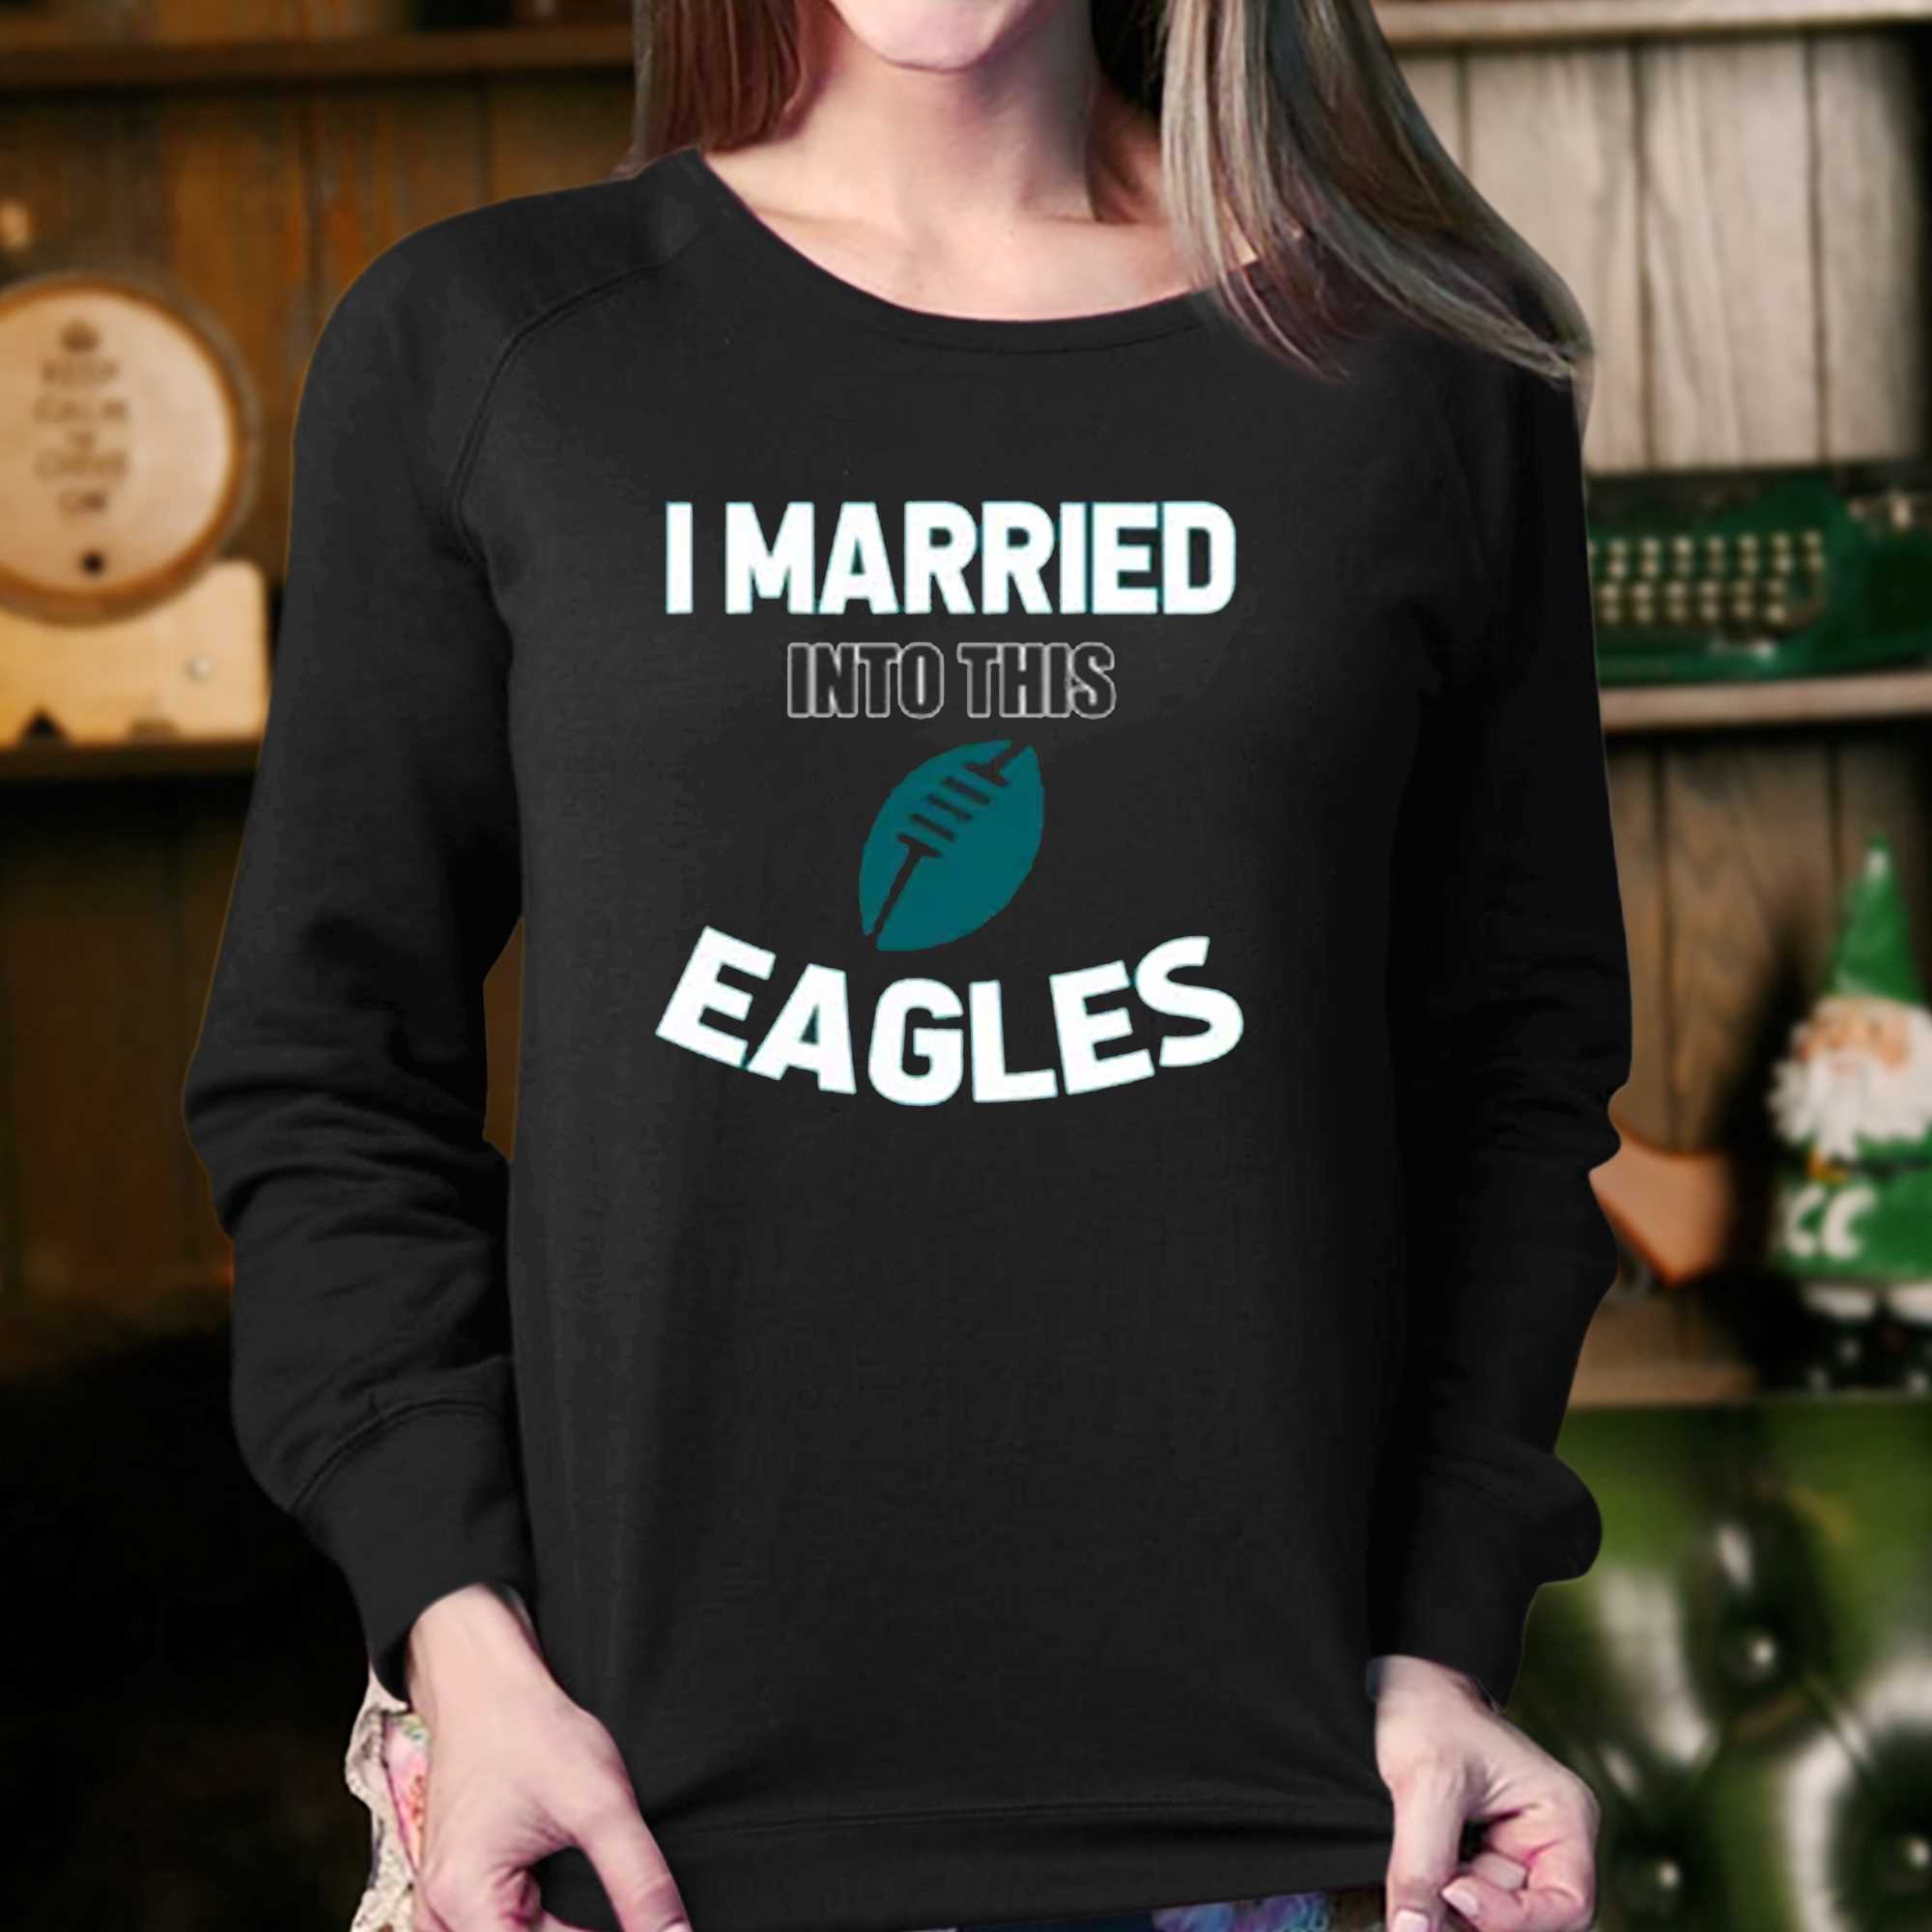 i married into this eagles t shirt